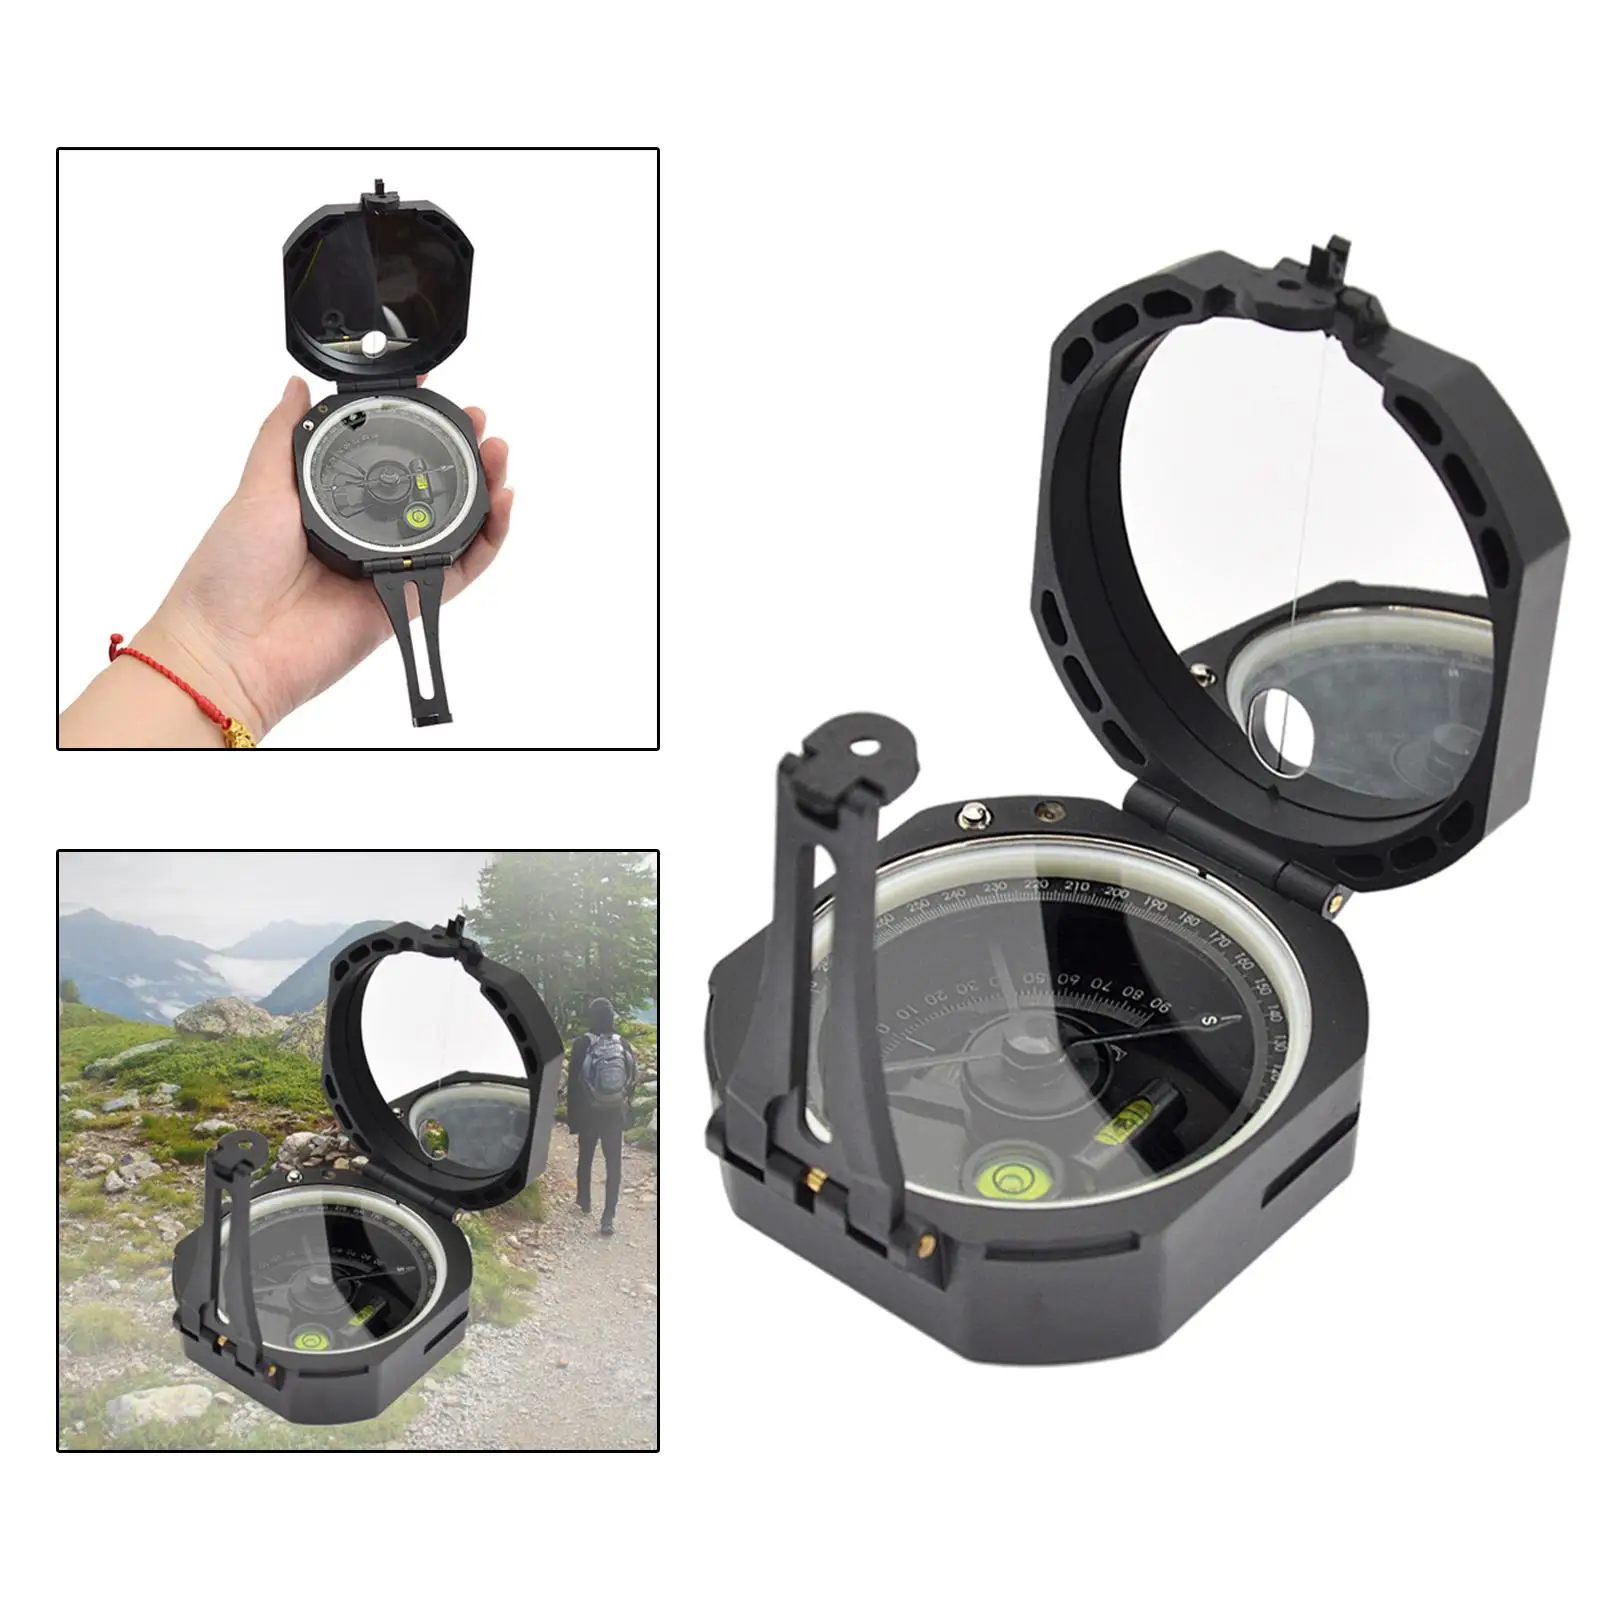 Multifunction Camping Compass with Pouch Survival Geology Hunting Pocket